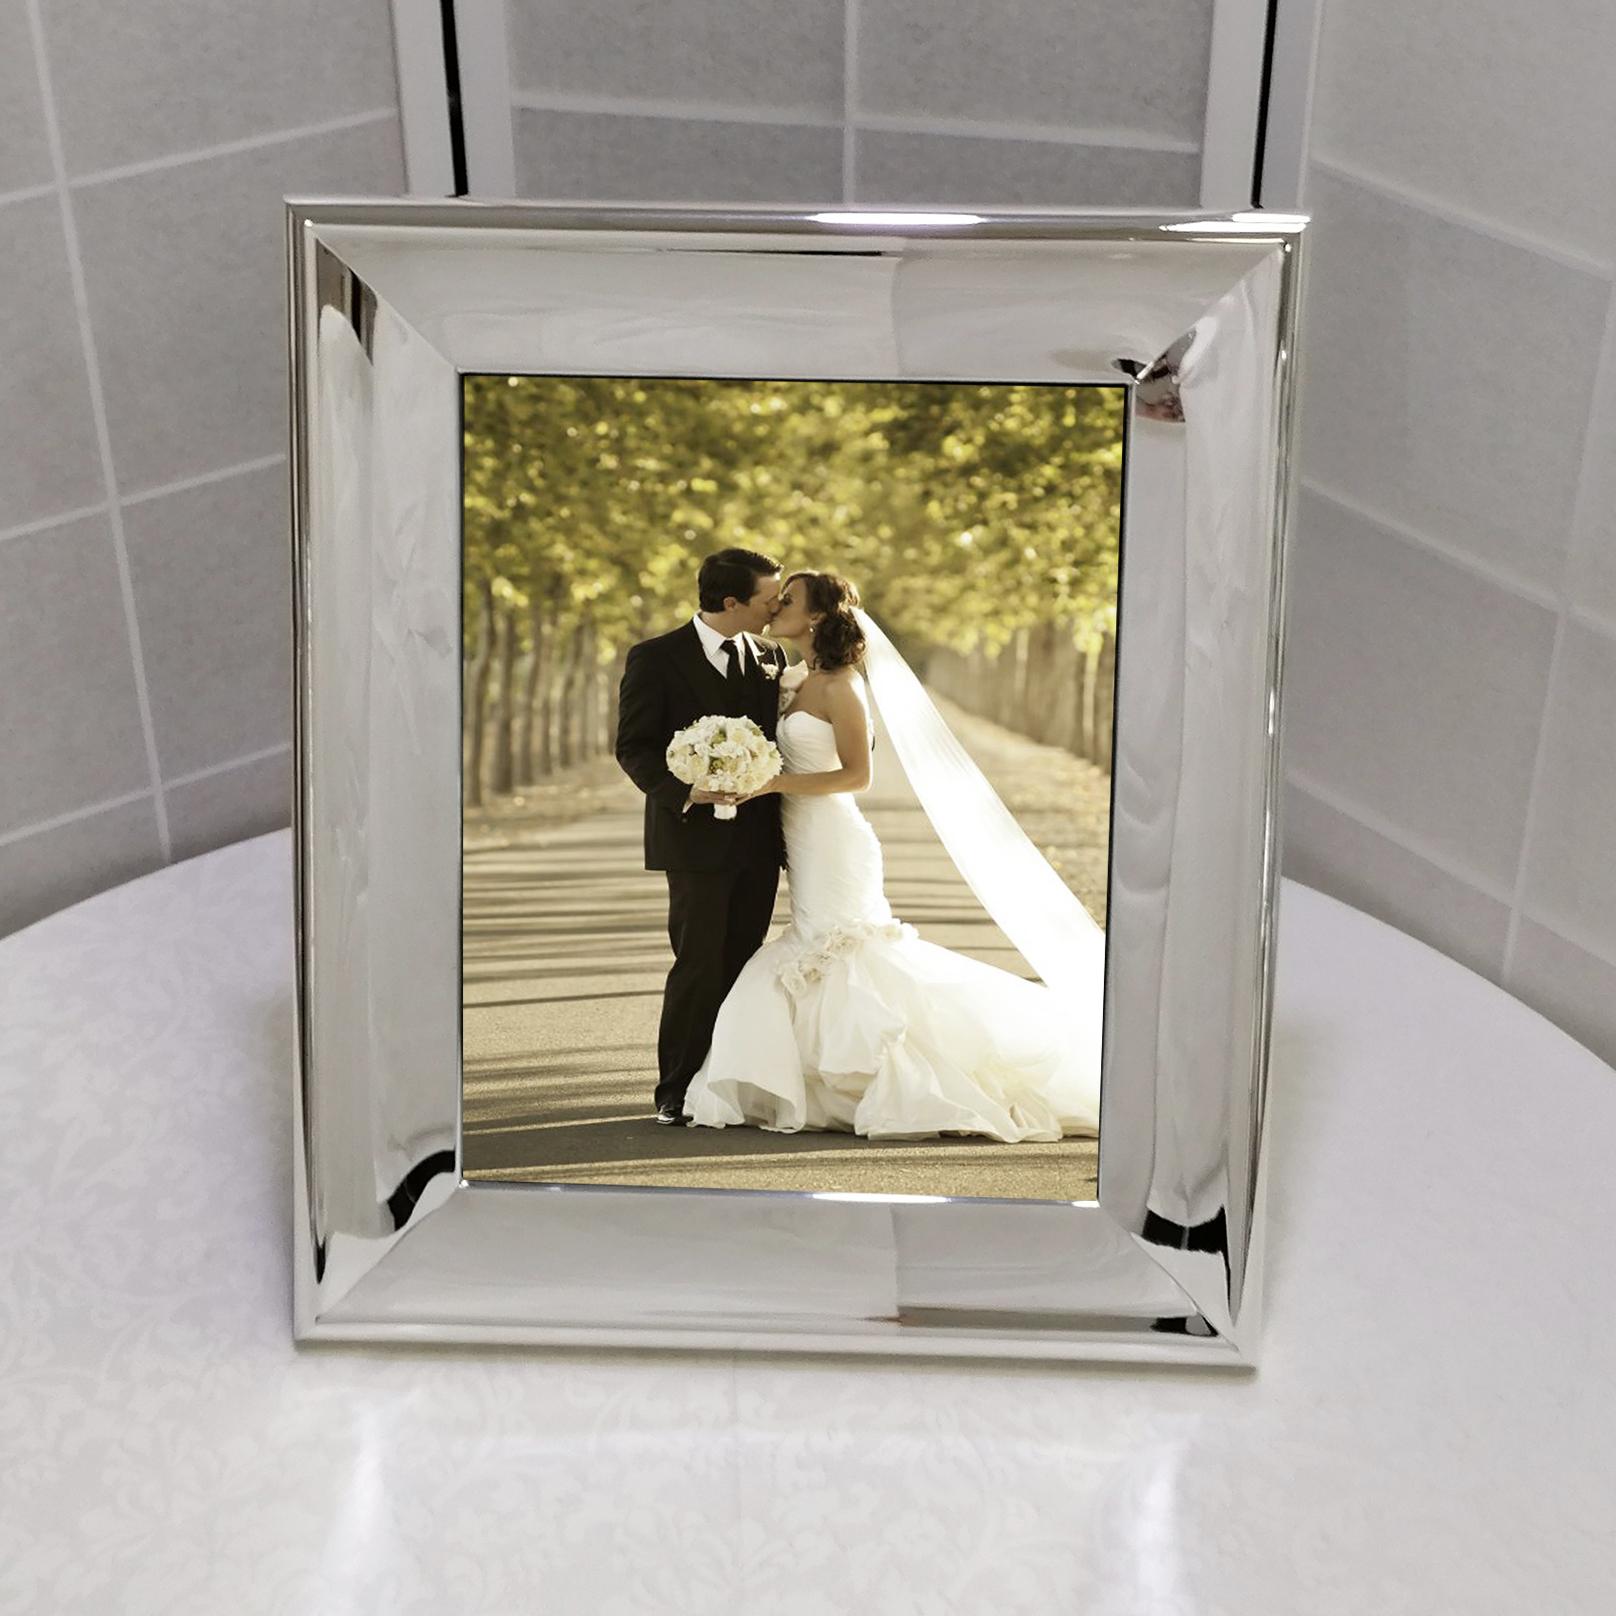 Large sterling silver photo frame.
The frame was made from a 925 silver sheet with a very wide and shaped edge, concave towards the inside and convex towards the outside edge. The silver plate also covers a large part of the outer edge and gives it